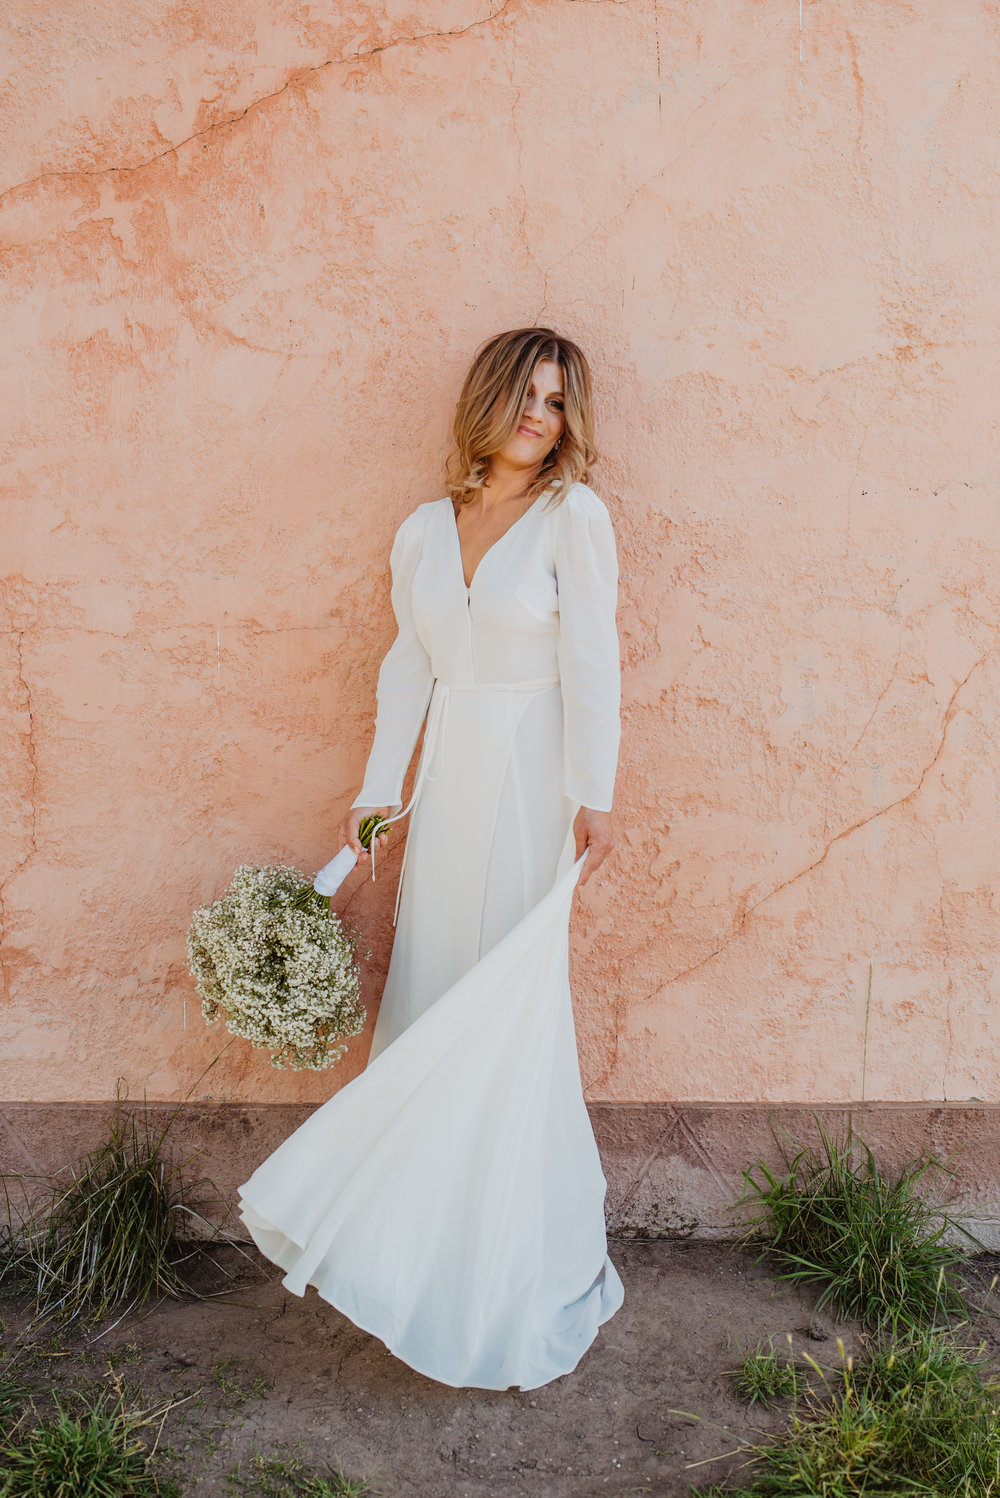 beautiful bride in a simple long sleeve white wedding dress and a babies breathe bouquet standing in front of a pinkish stucco wall for her adventure elopement Jocilyn Bennett Photography | How to Plan an Elopement | Why Elope | Reasons to Elope | Destination Wedding Photographer | Utah Wedding Photographer | Adventure Photographer | Destination Elopement Photographer | Traveling Photographer | Grand Teton Elopement | Grand Teton Photographer | National Park Weddings | Mountain elopement |